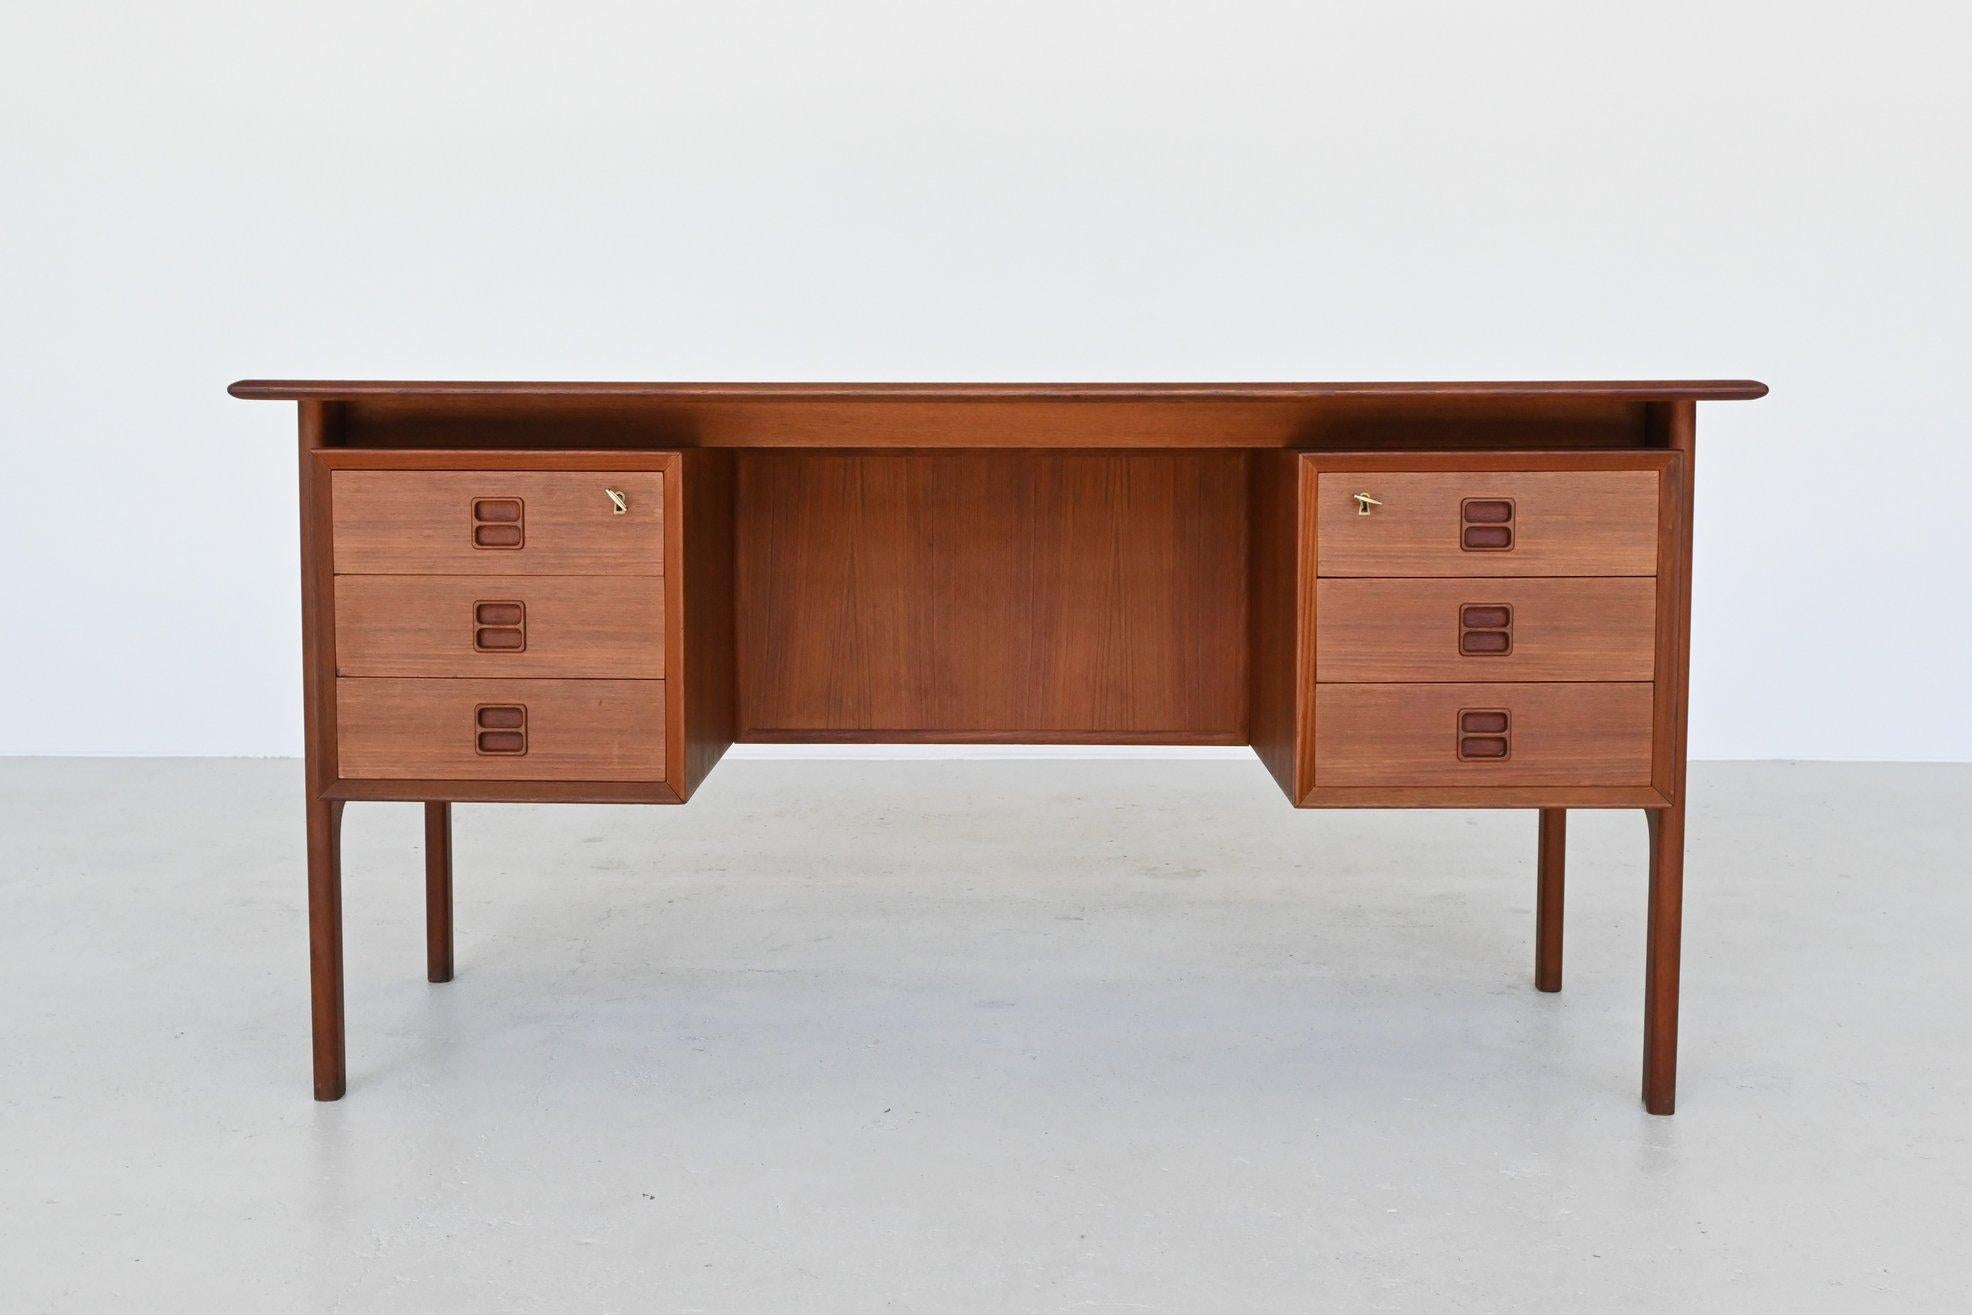 Very nicely crafted writing desk designed by Erik Brouer and manufactured by Brouer Møbelfabrik, Denmark, 1960. It’s made of teak wood and has a very nice grain to the wood. This symmetric desk has 6 drawers and also 3 storage spaces at the back,